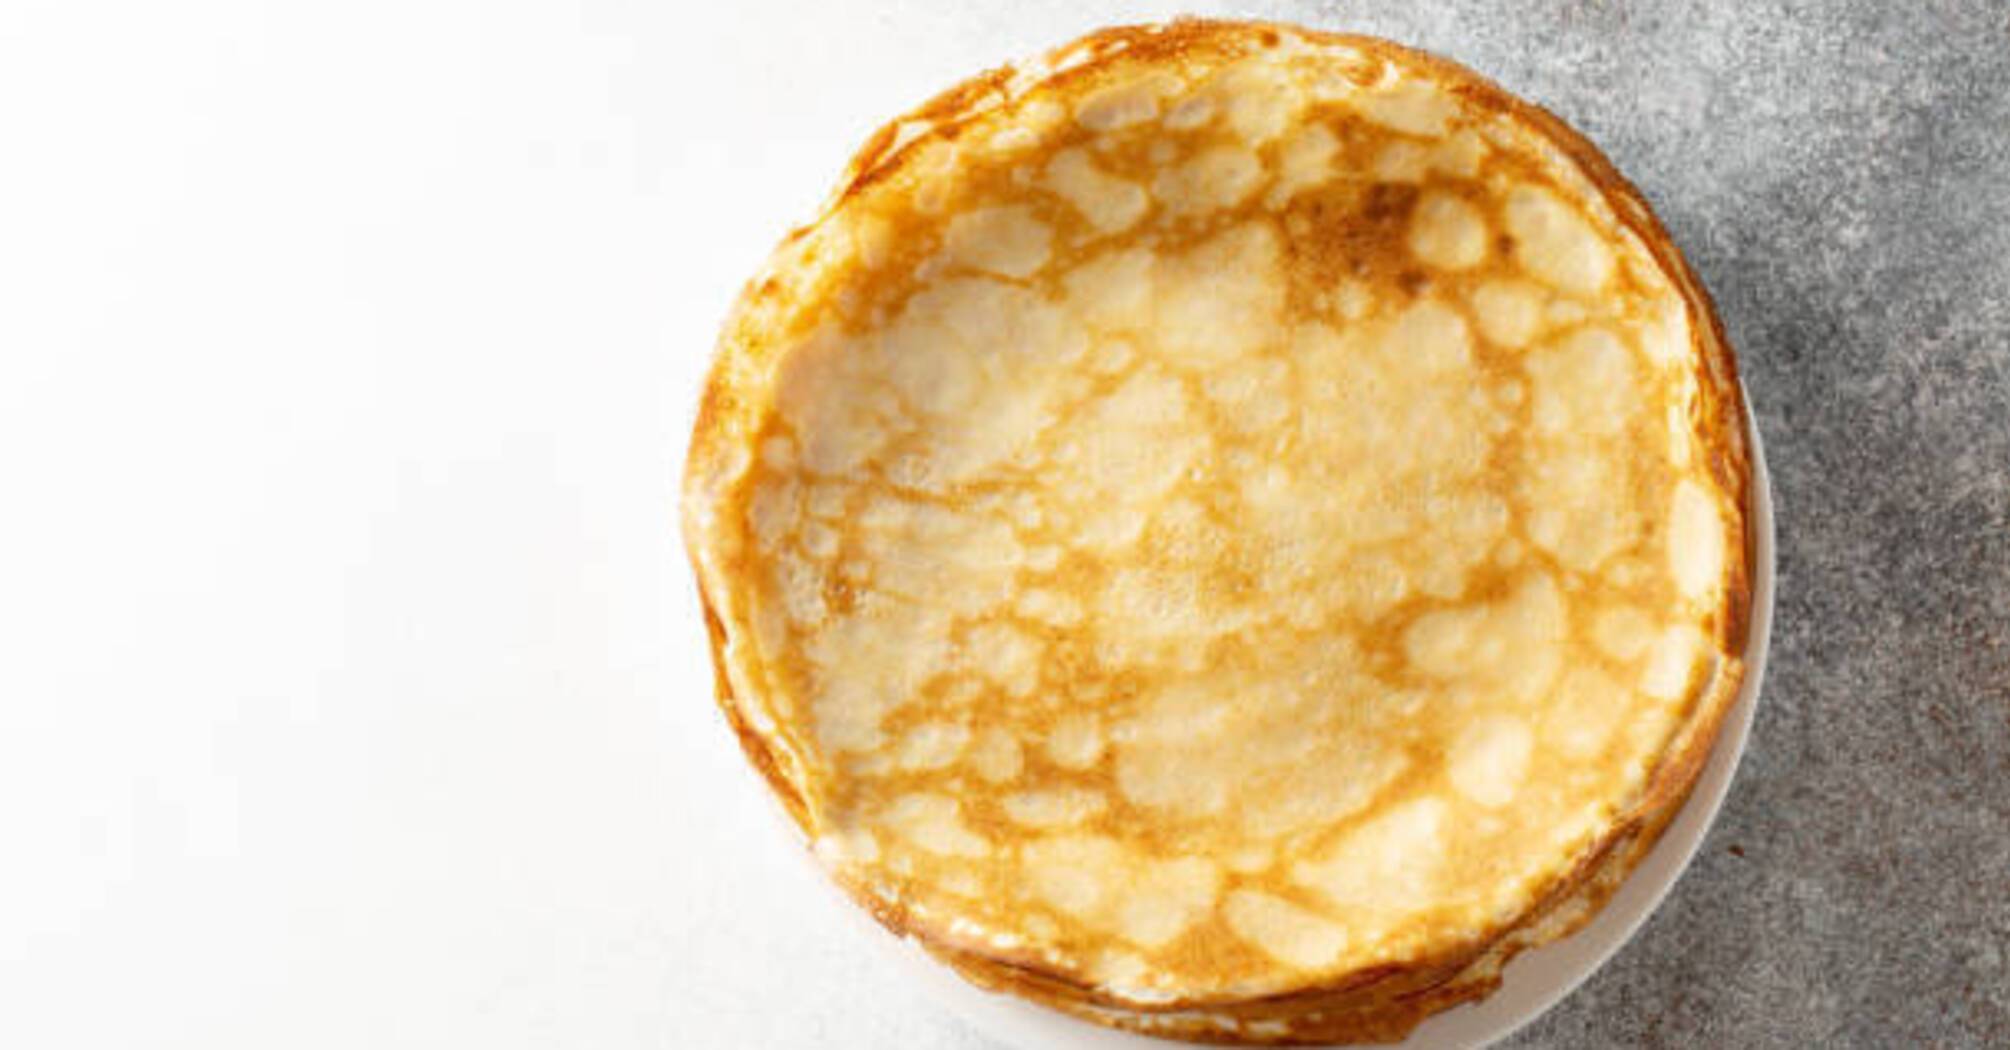 What to use to make delicious and thin pancakes